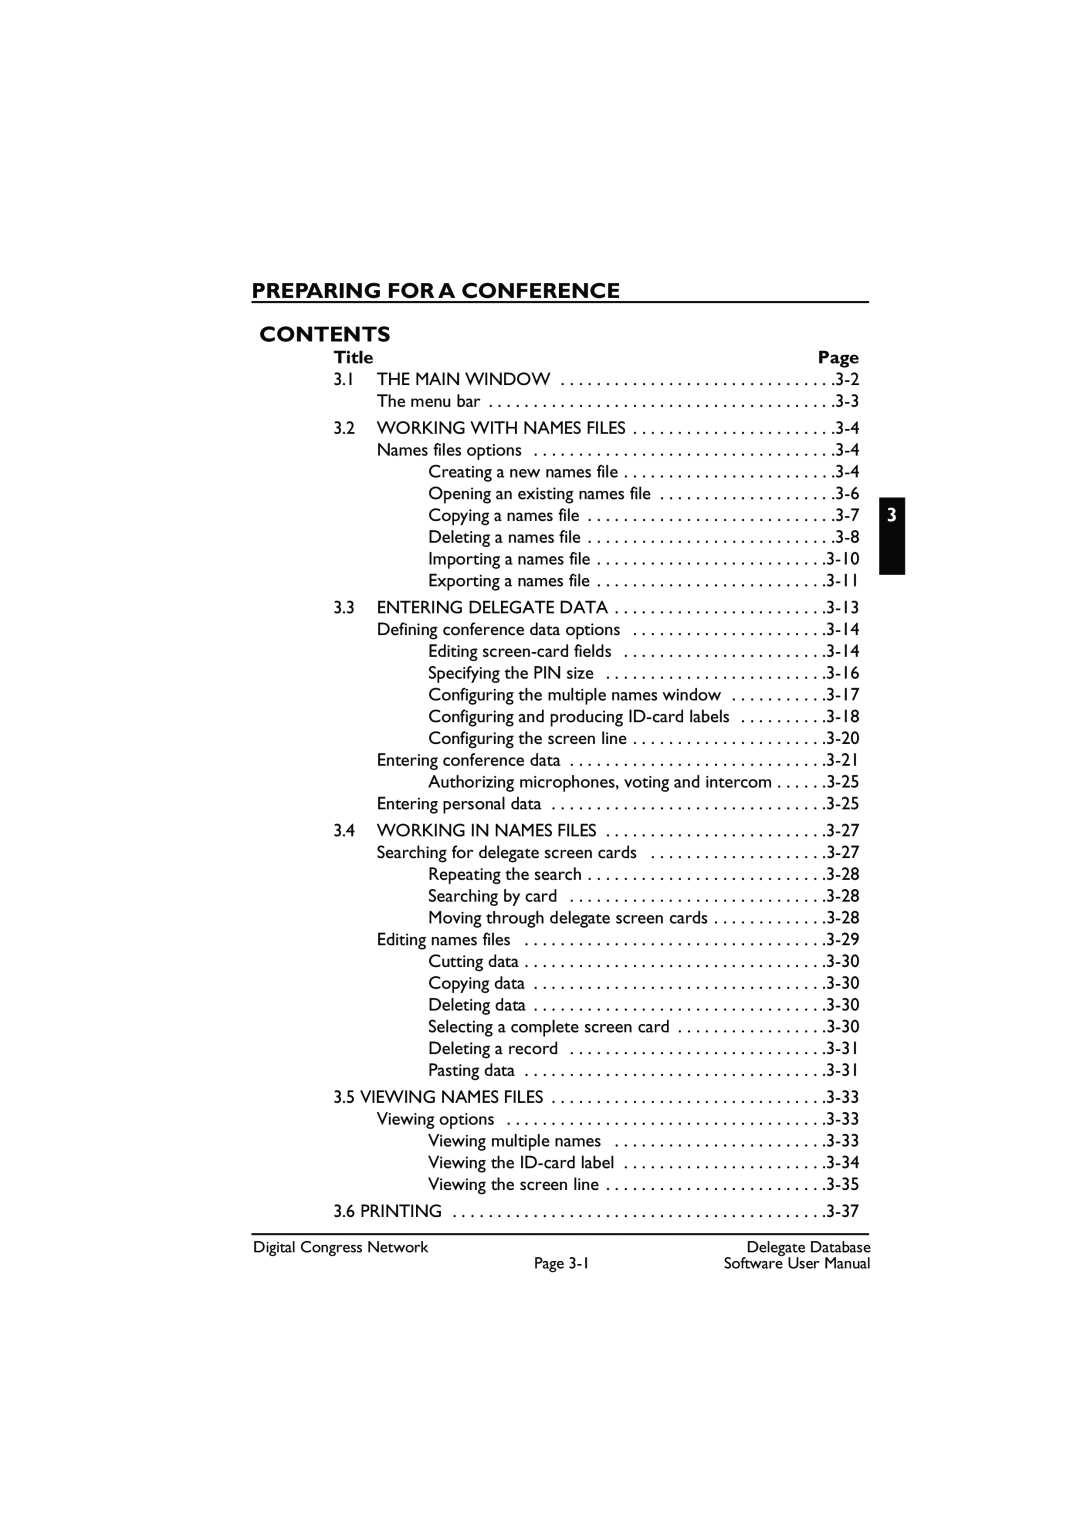 Bosch Appliances LBB3580 user manual Preparing For A Conference Contents, Title, Page 